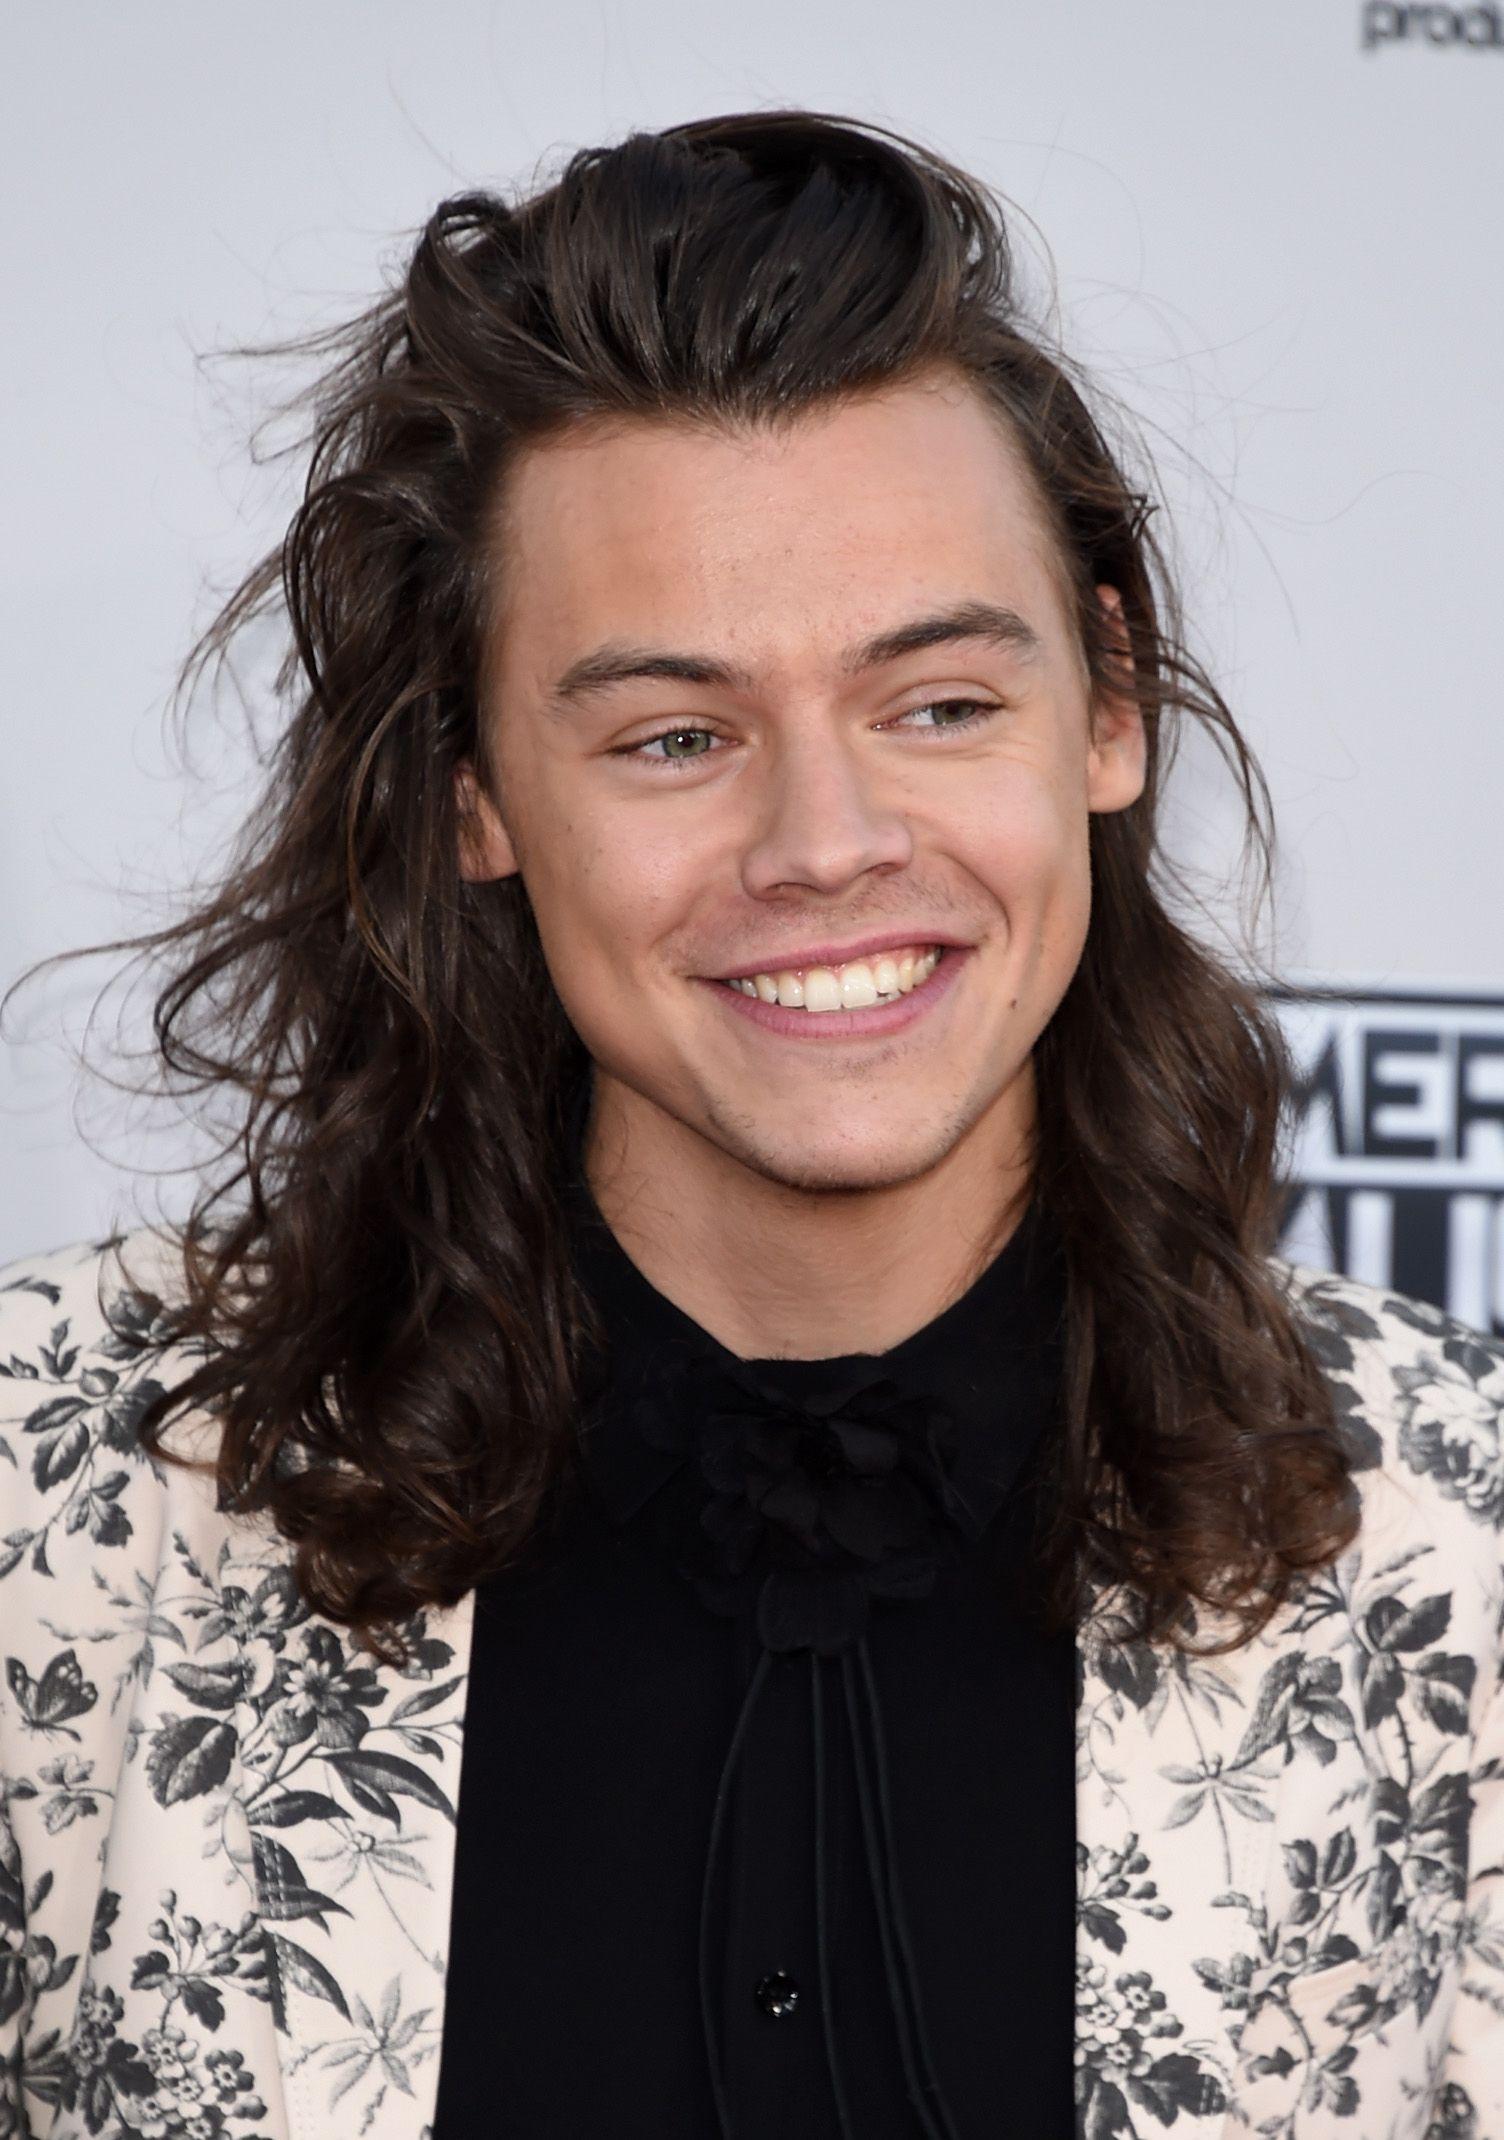 Harry Styles Wears Floral Suit To The 2015 American Music Awards